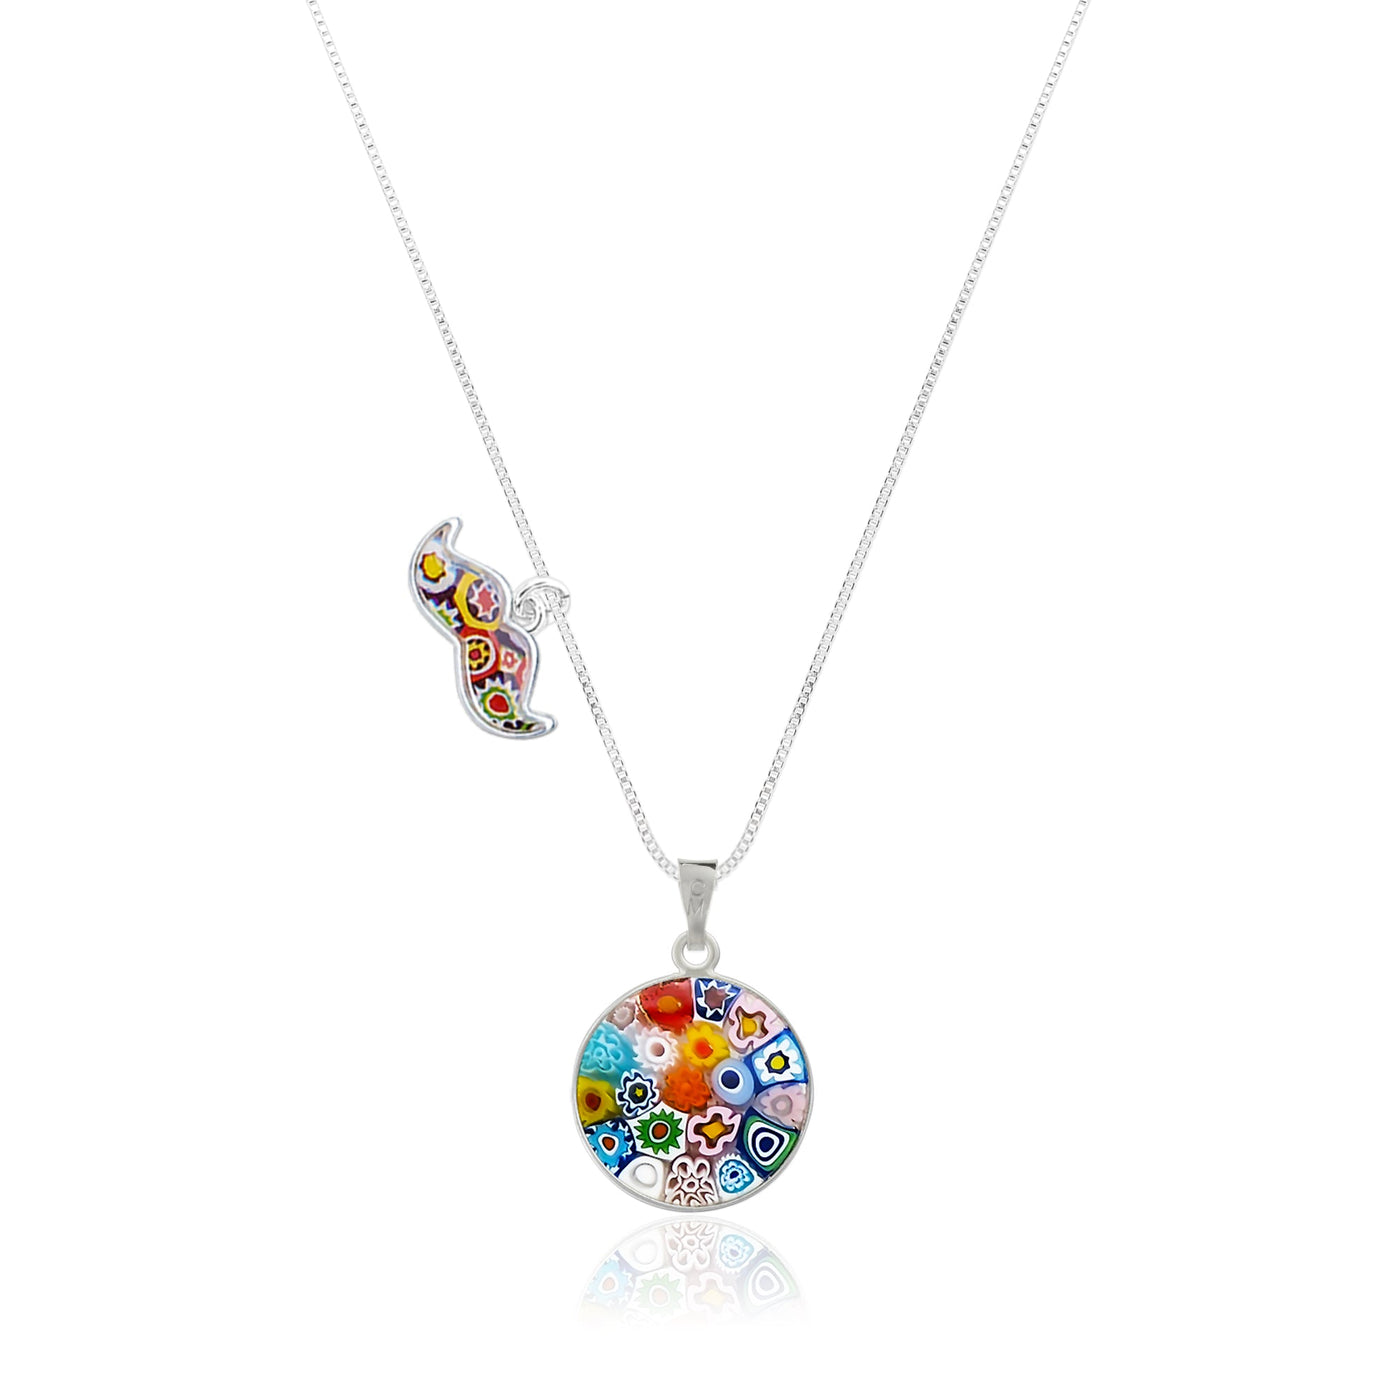 Bouquet in Bloom Necklace - 18mm - Pendant Necklace